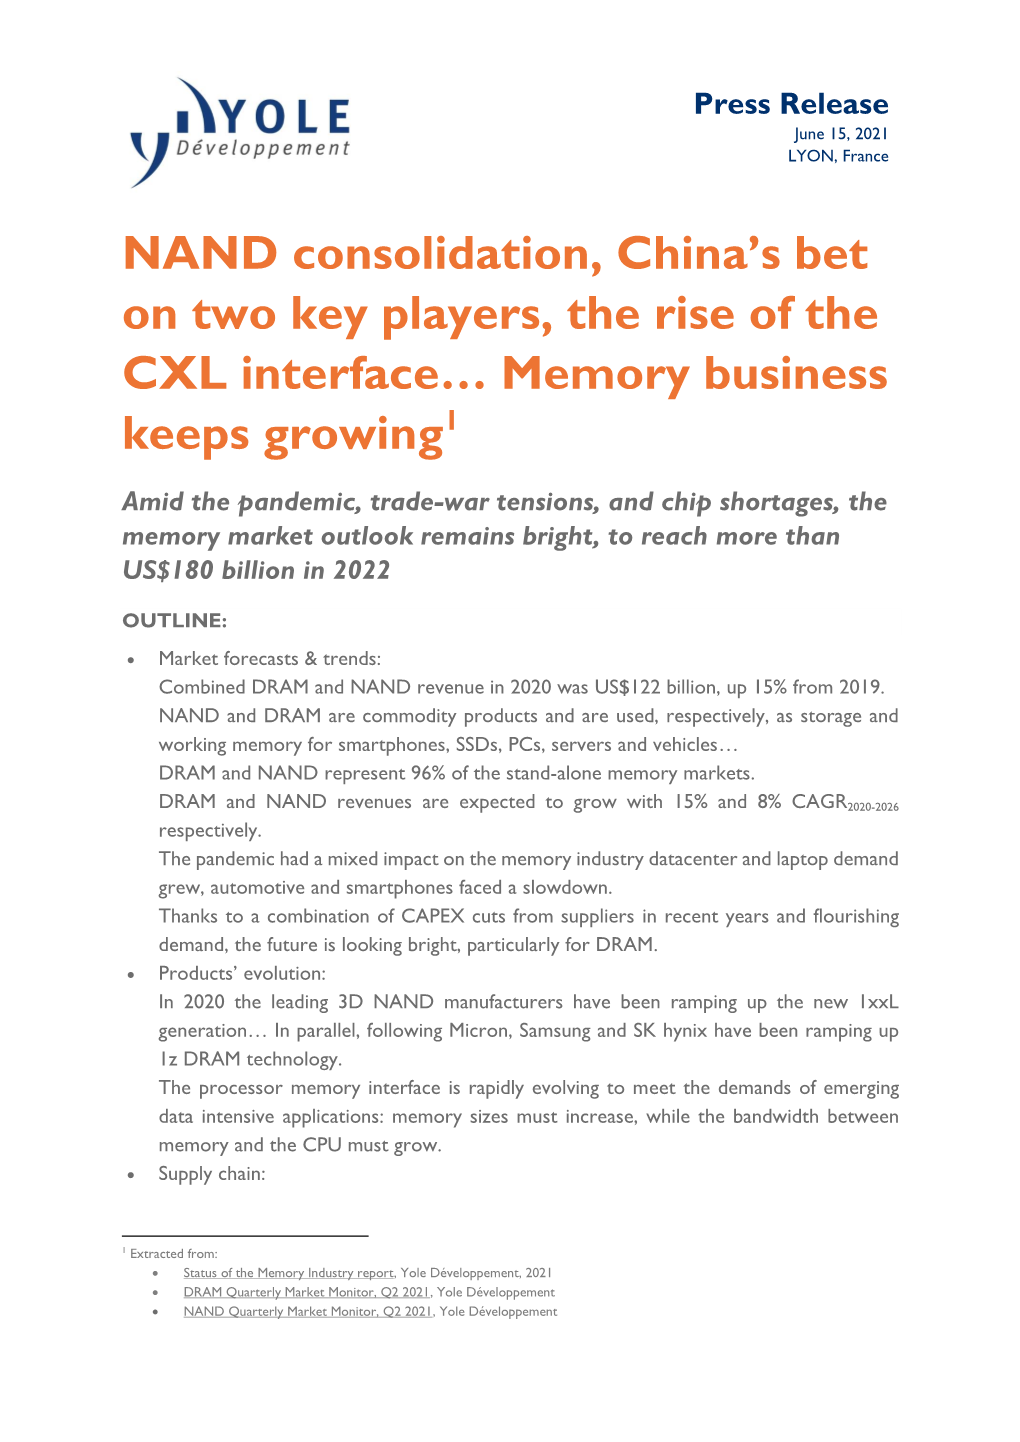 NAND Consolidation, China's Bet on Two Key Players, the Rise of the CXL